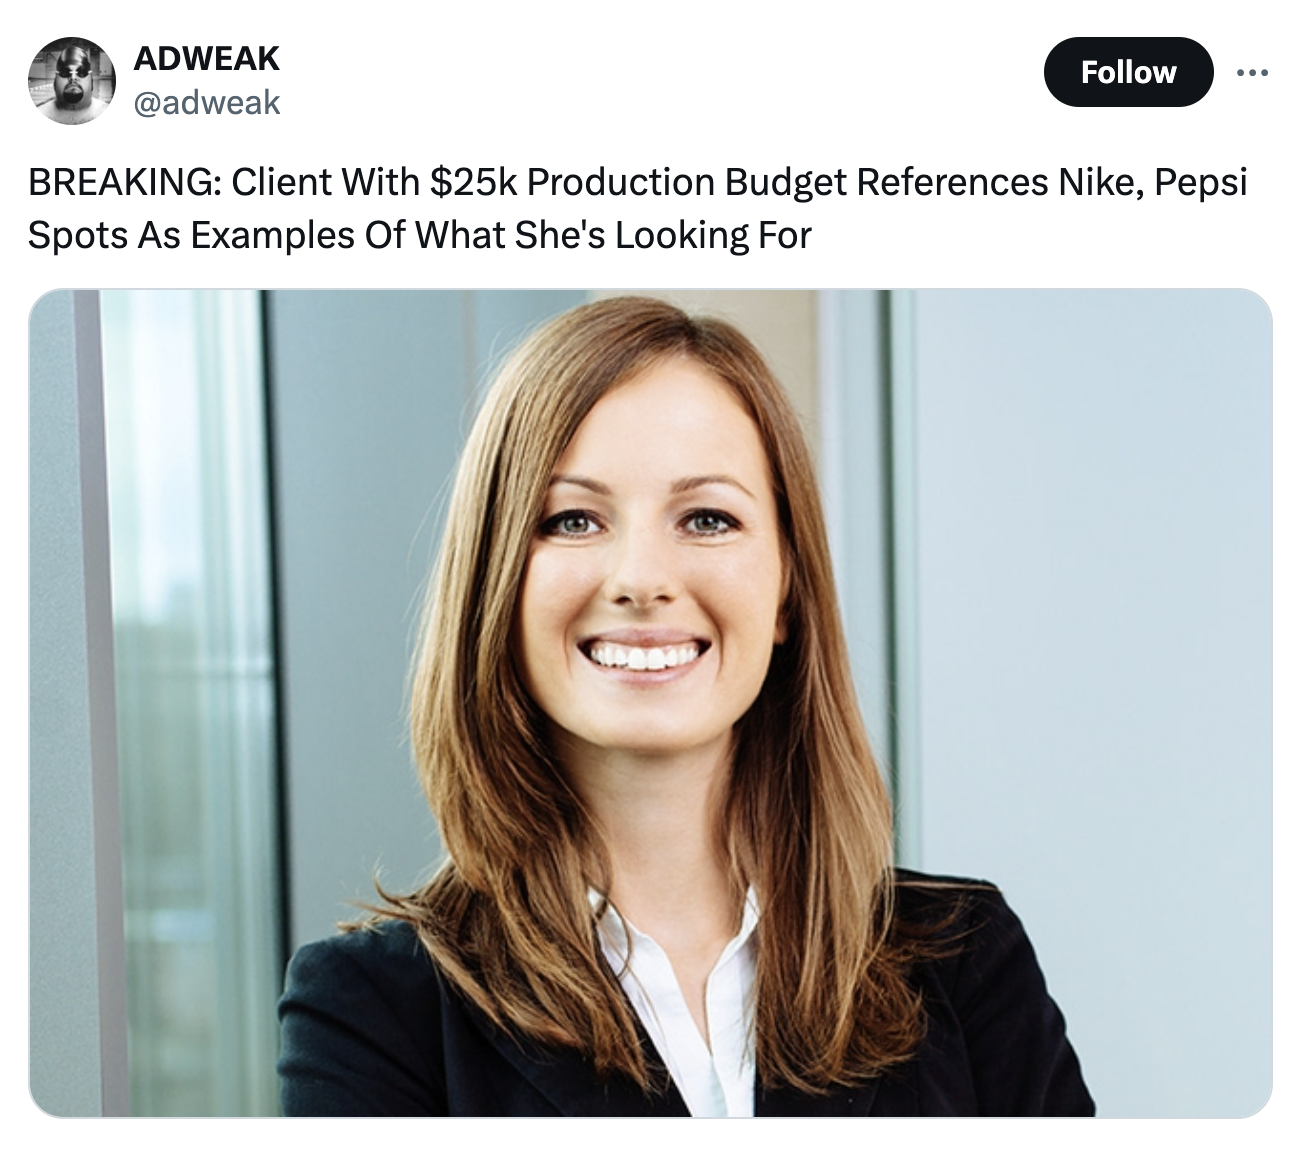 executive female - Adweak Breaking Client With $25k Production Budget References Nike, Pepsi Spots As Examples Of What She's Looking For